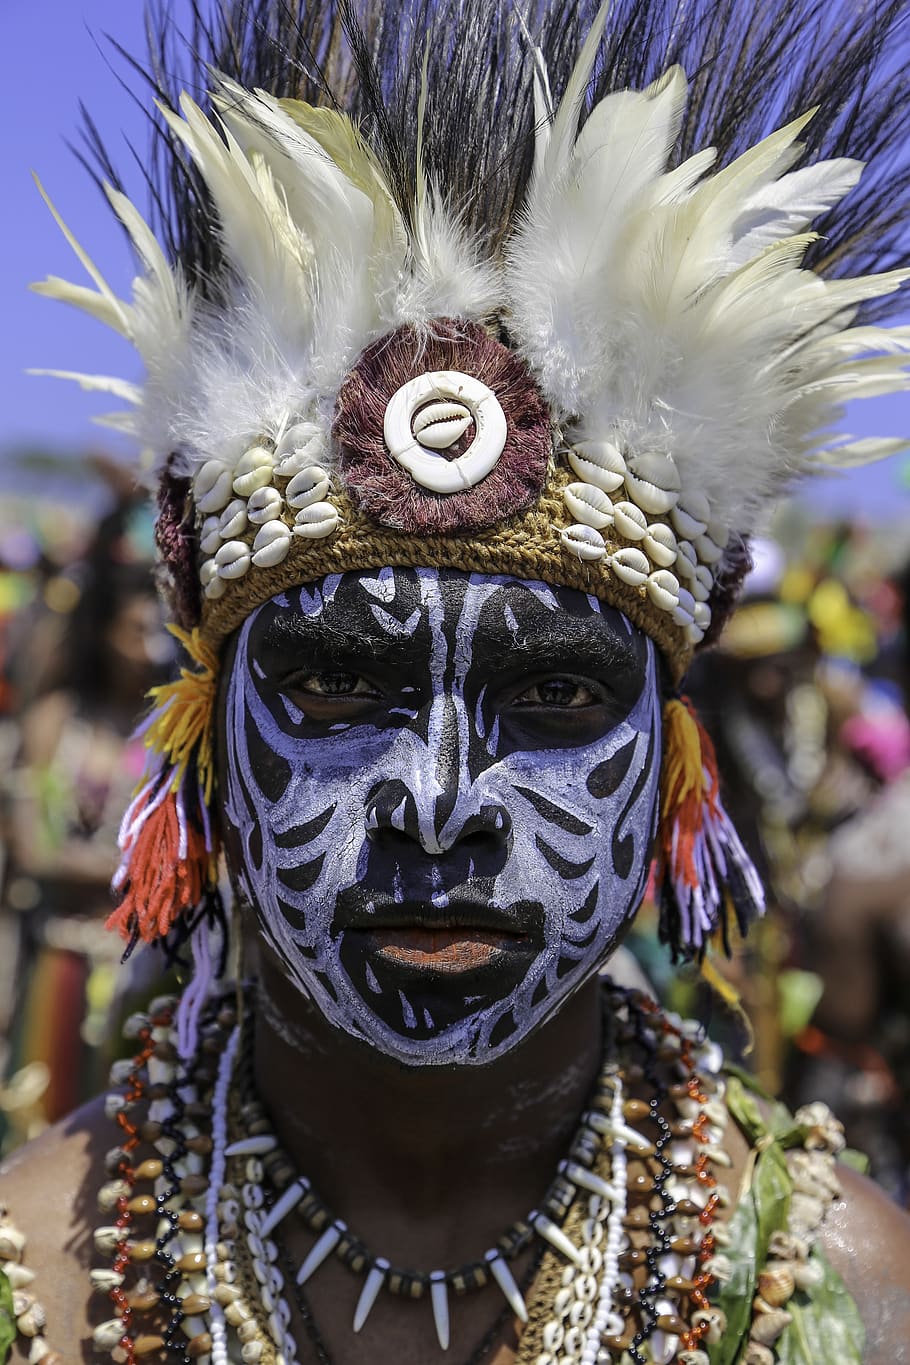 culture, face paint, cultural, handsome, warrior, papua new guinea, mask, disguise, close-up, focus on foreground